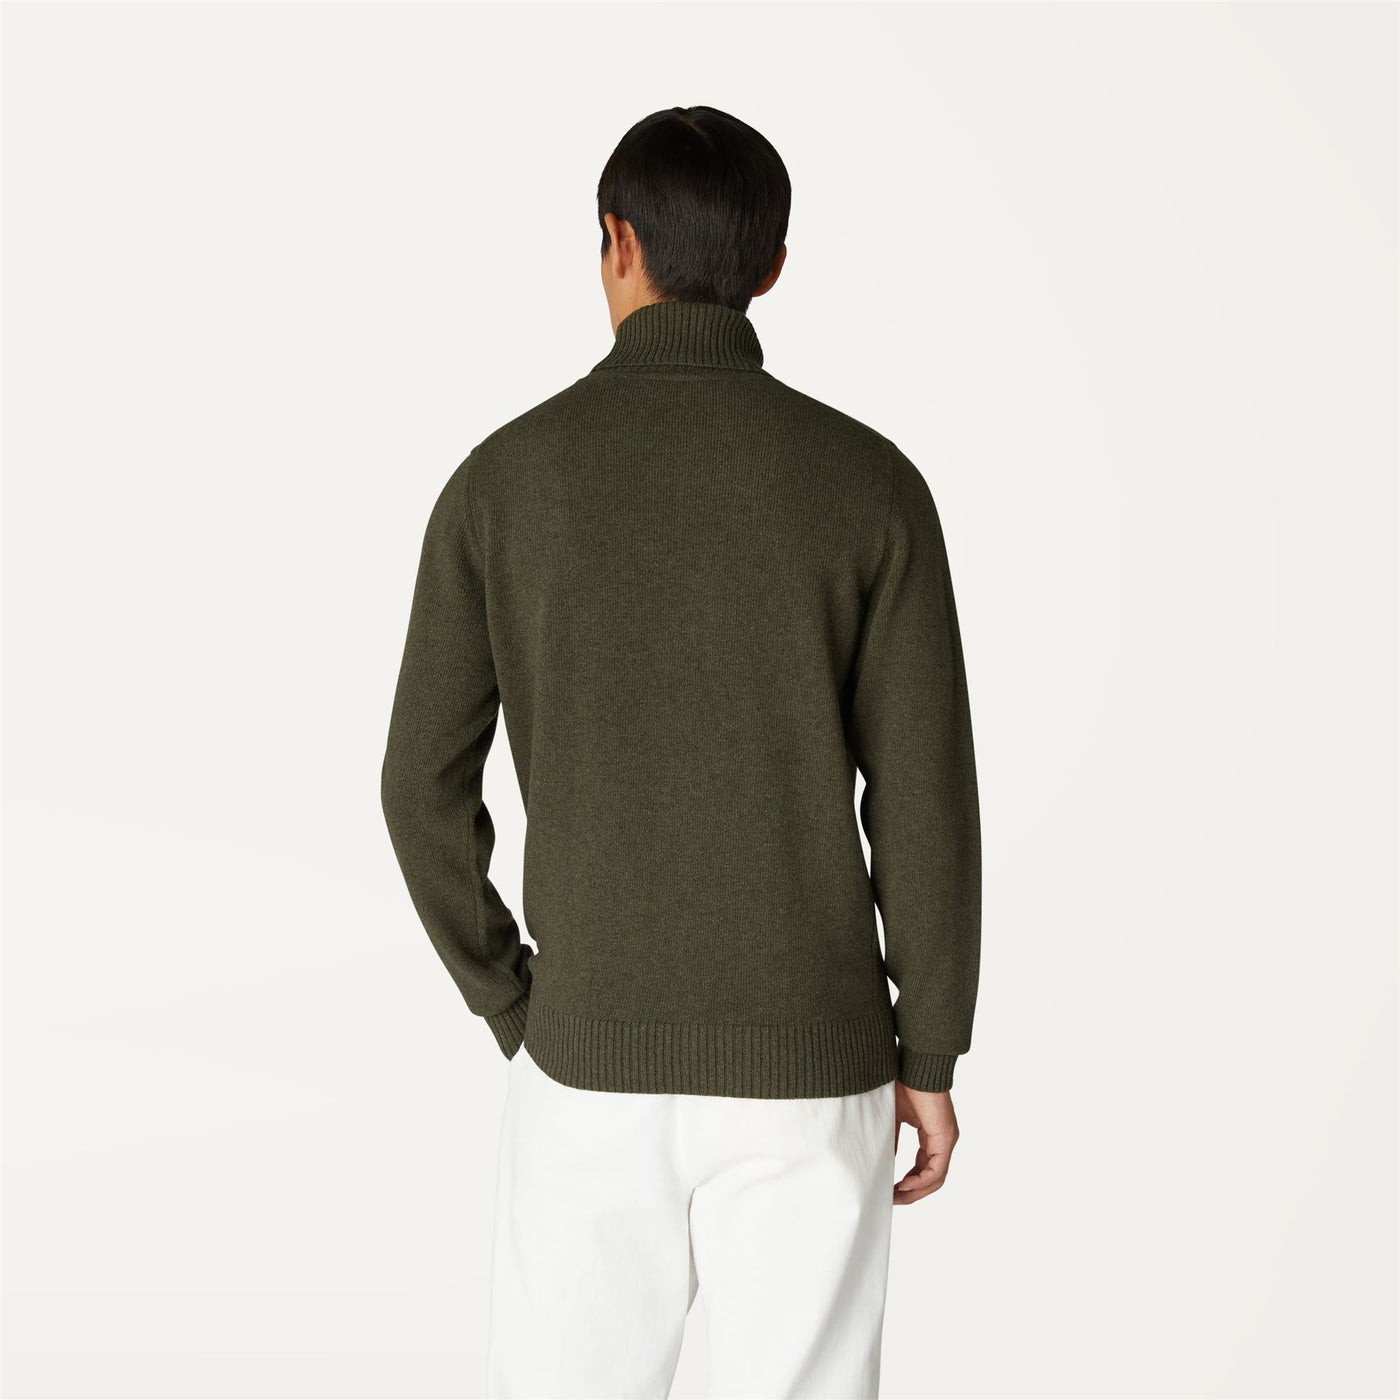 Knitwear Man HENRY LAMBSWOOL Pull  Over GREEN BLACKISH Dressed Front Double		